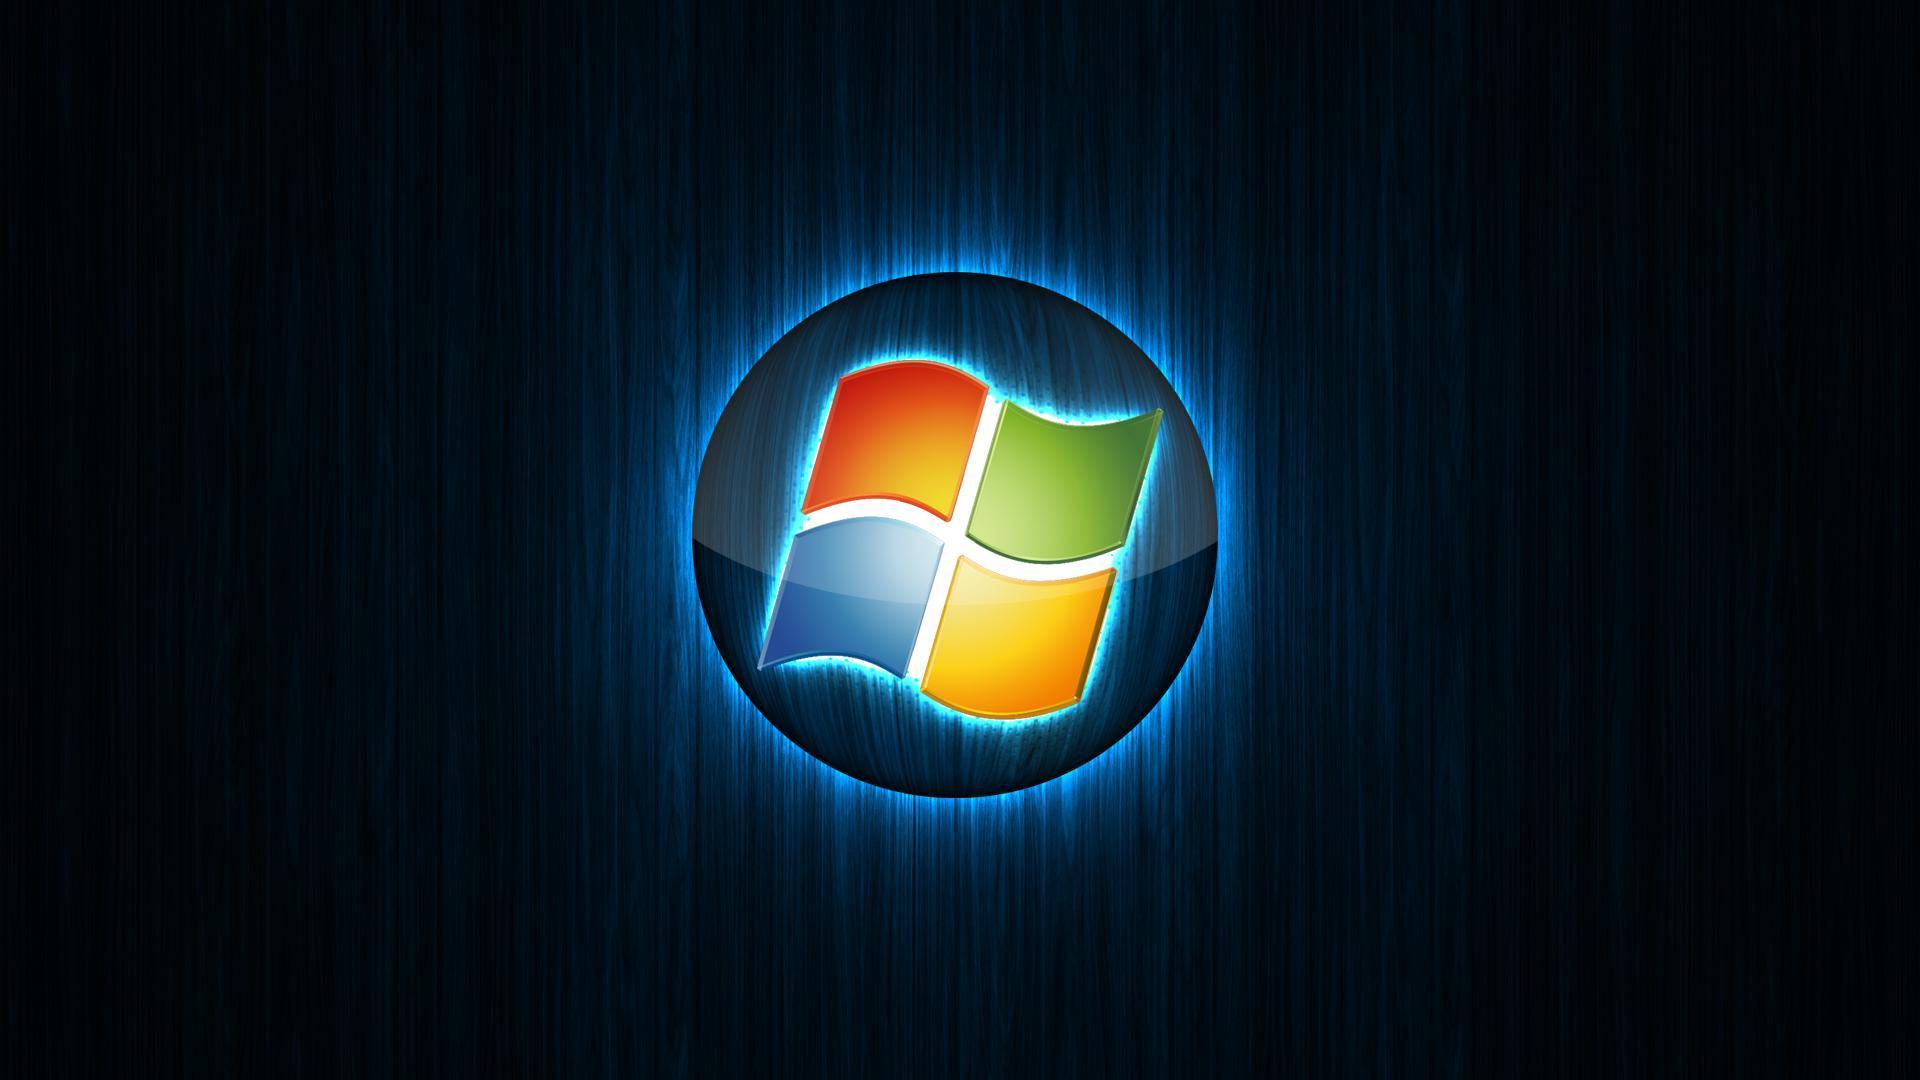 download the new for windows 23-06-23 989